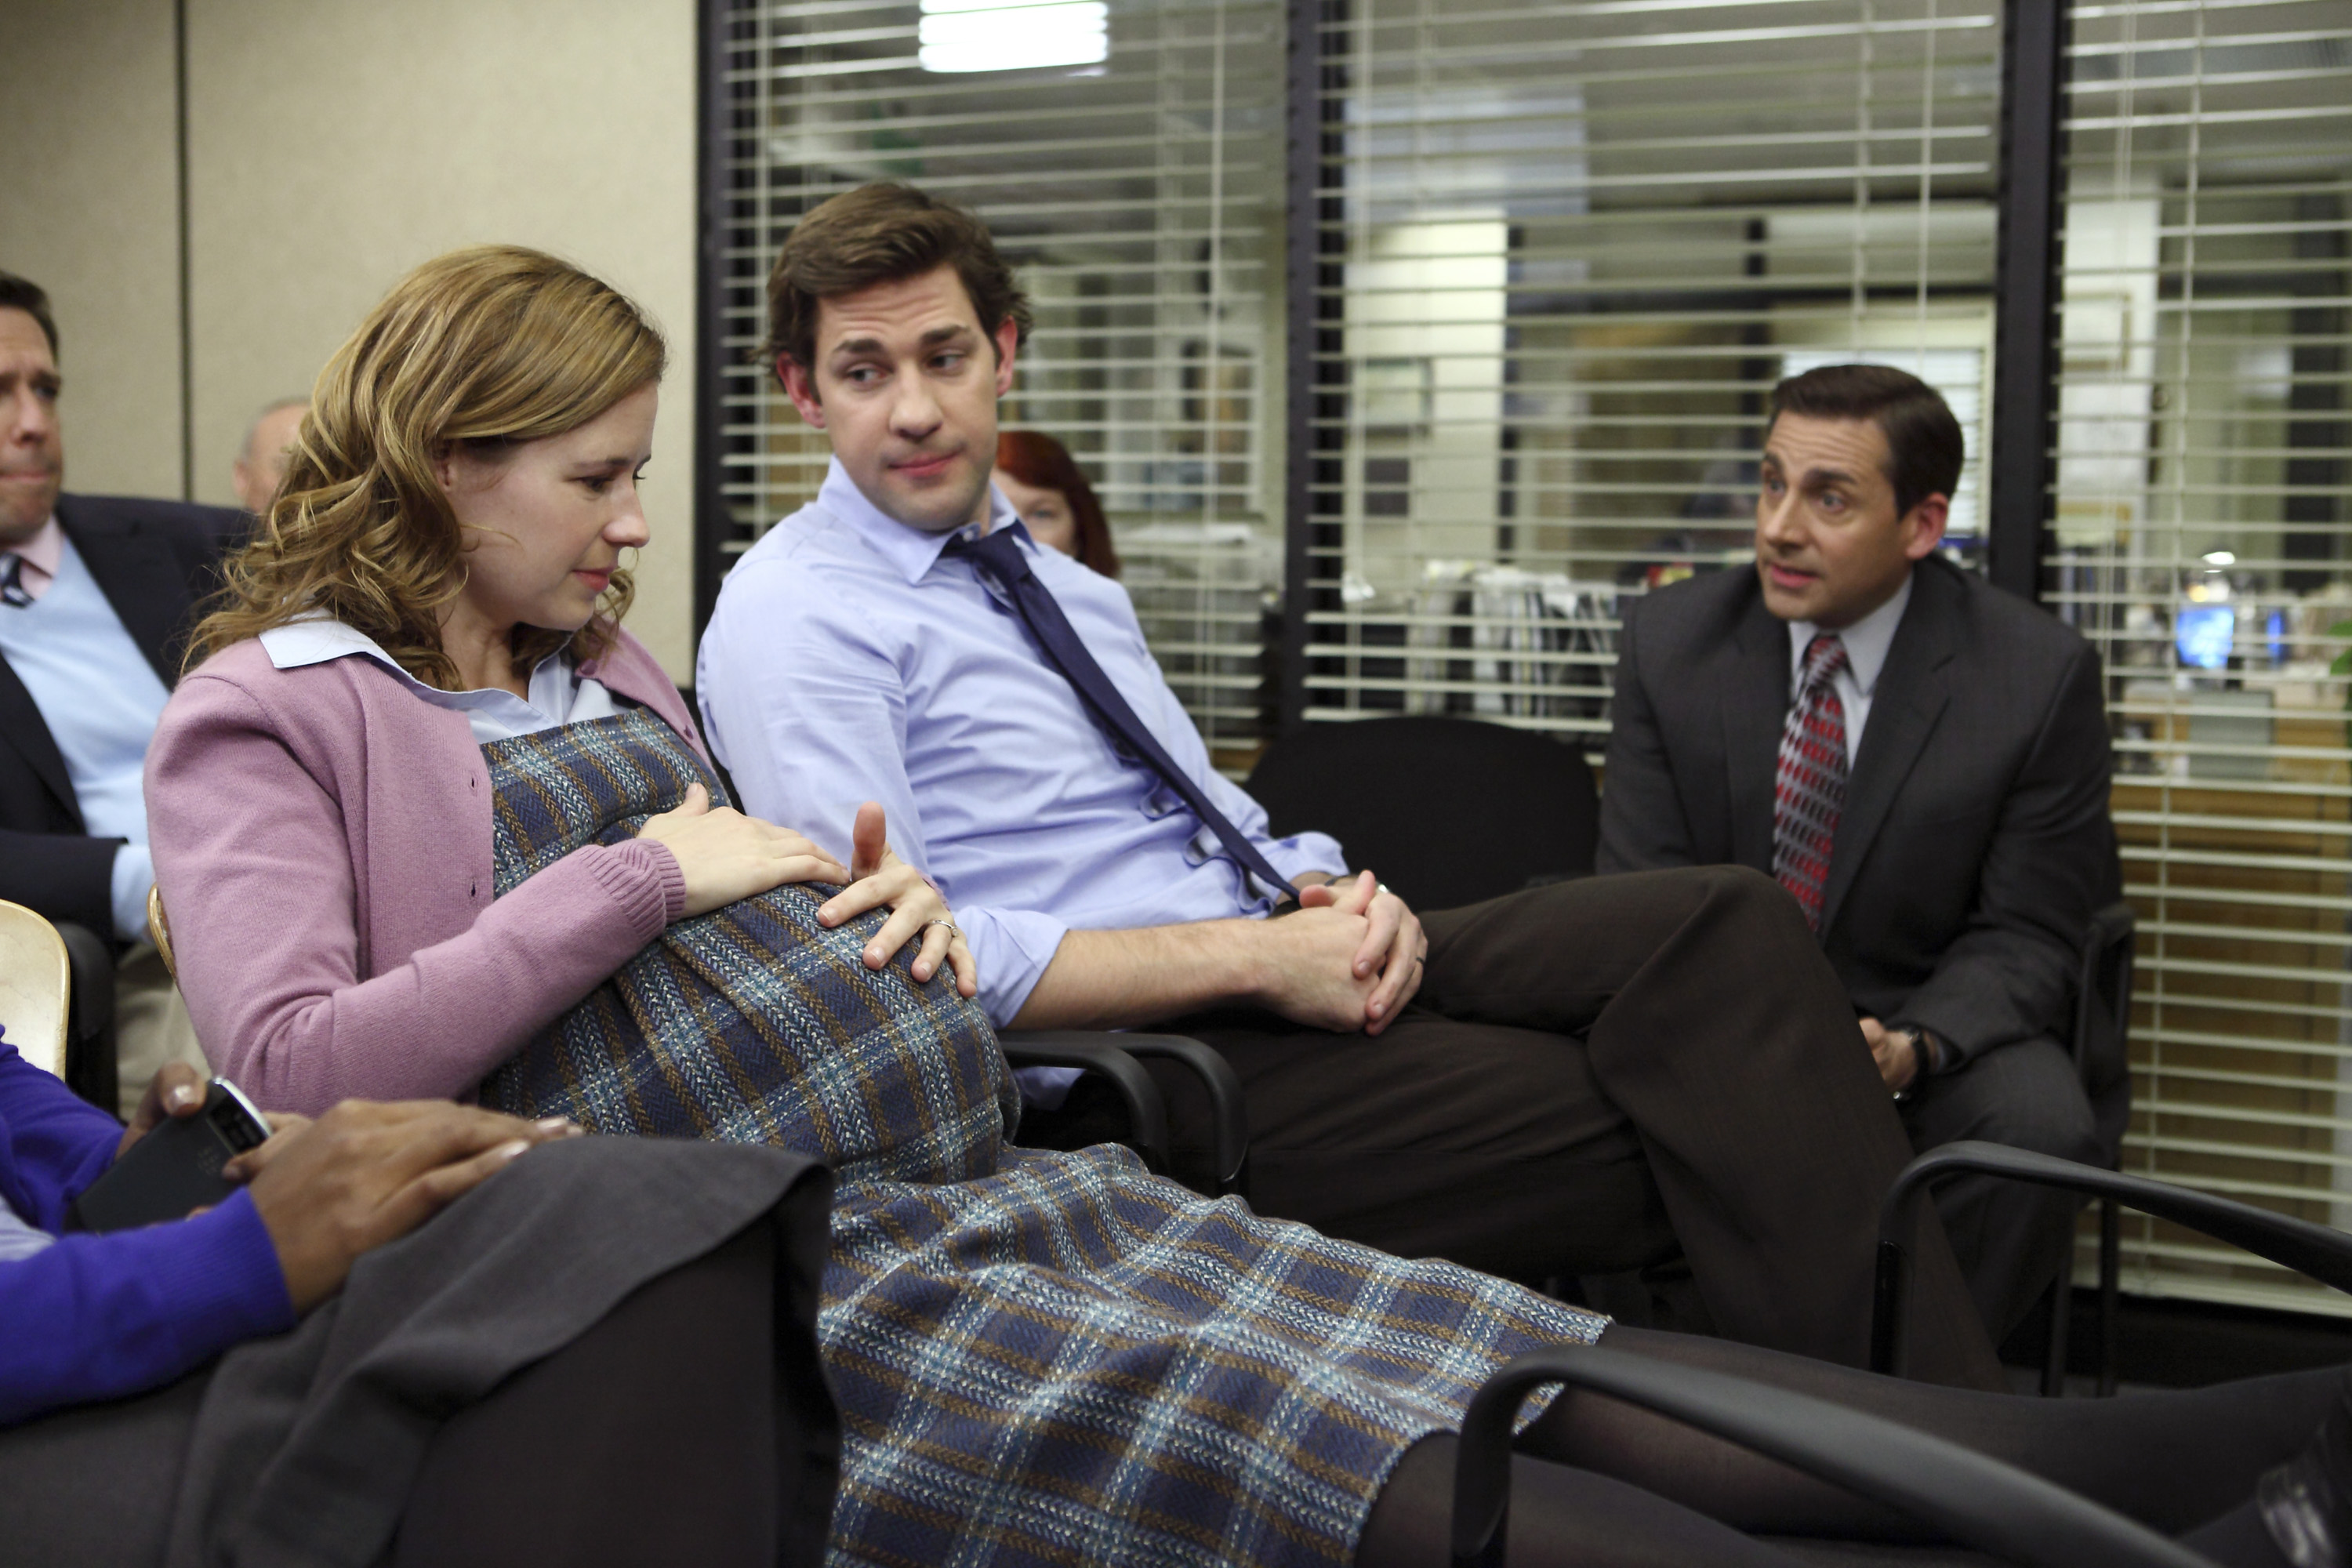 The Office' Episode 'Baby Shower' Features These Cast Member's Babies